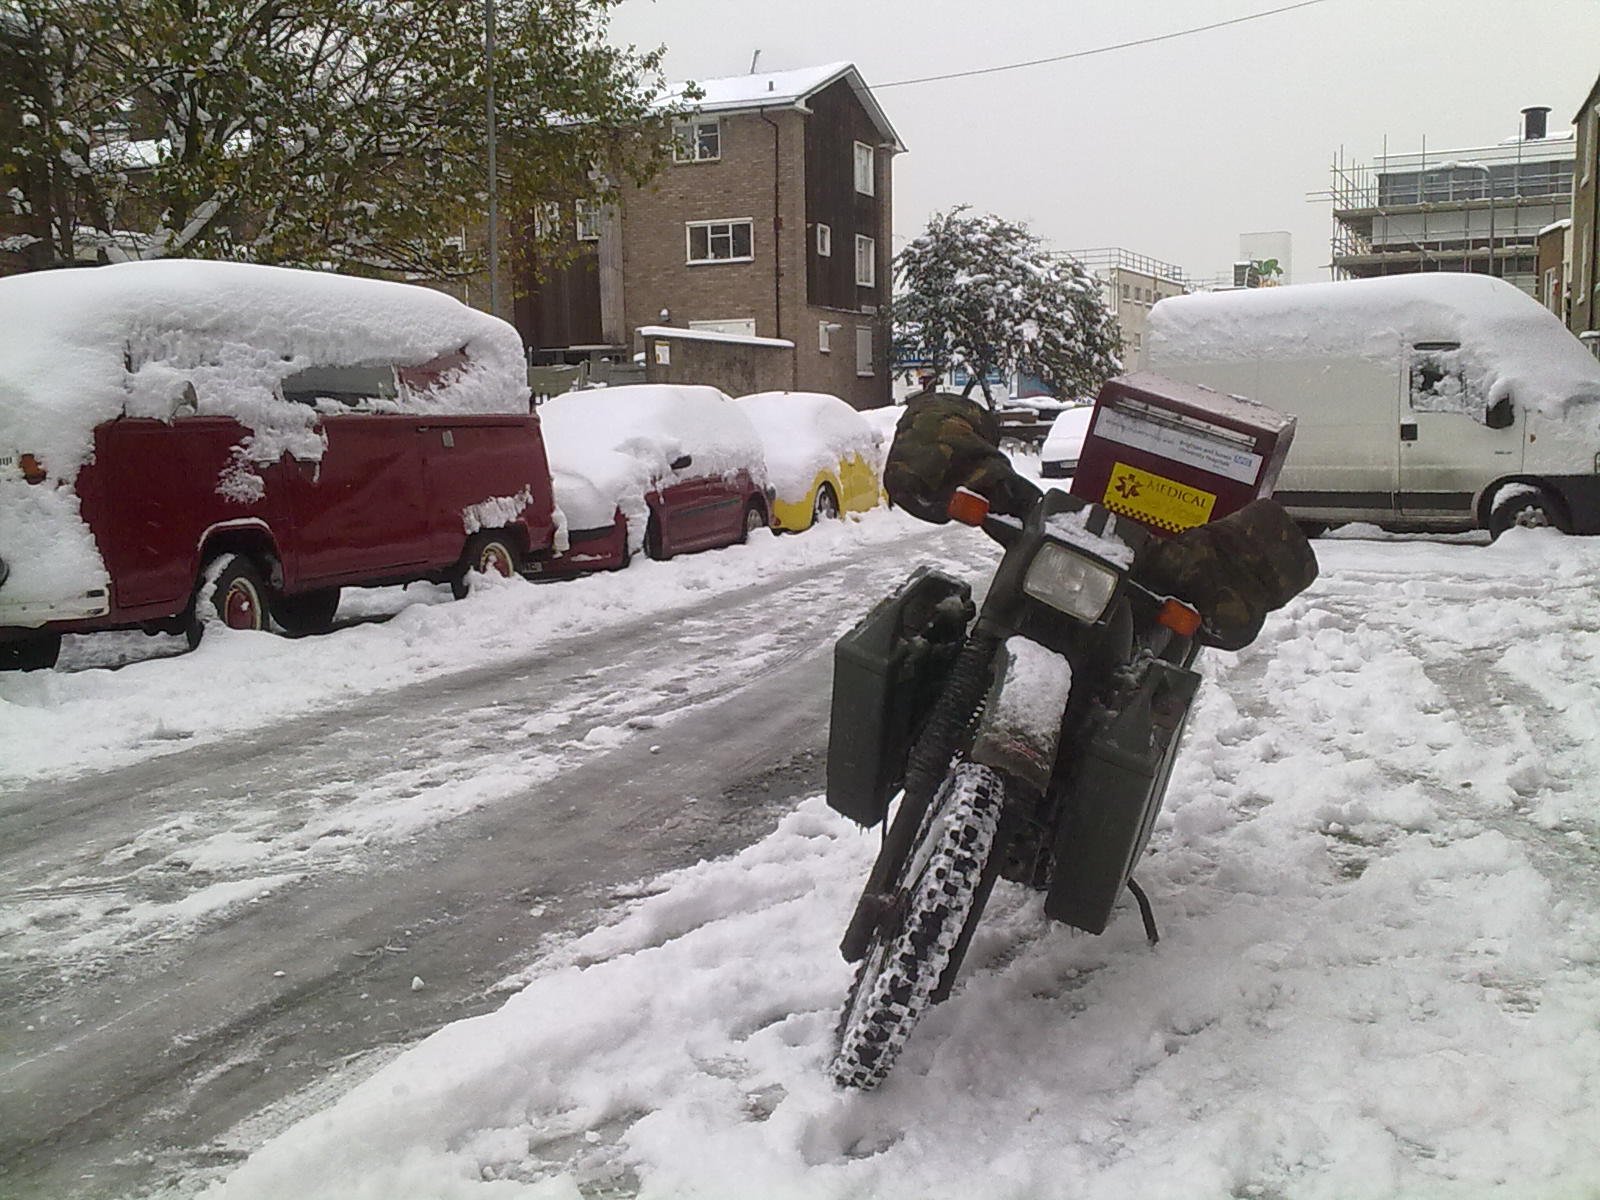 A Harley-Davidson MT350 being used in the snow